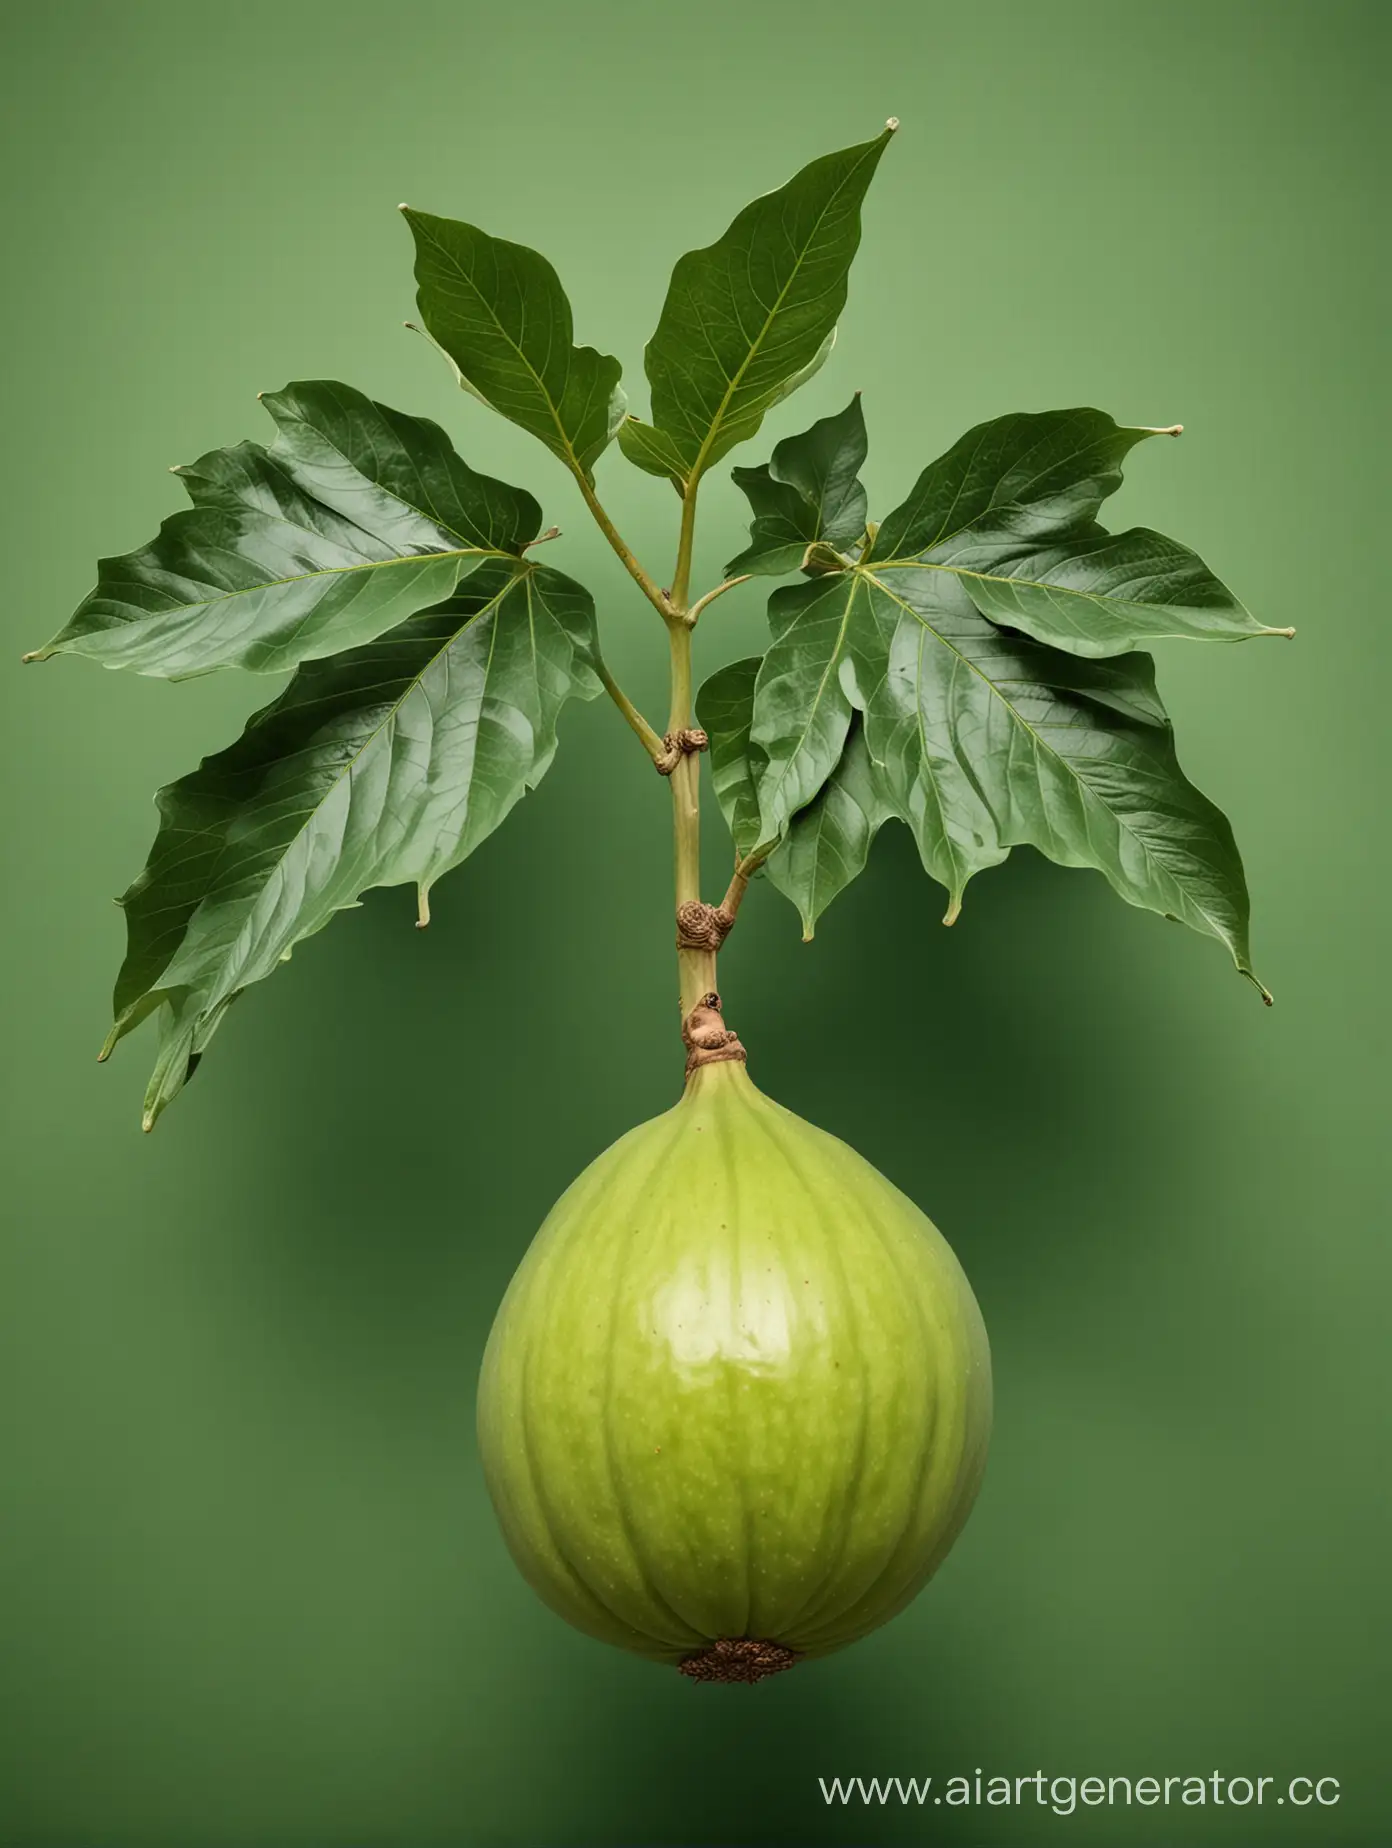 Juicy-Big-Figs-on-a-Lush-Green-Background